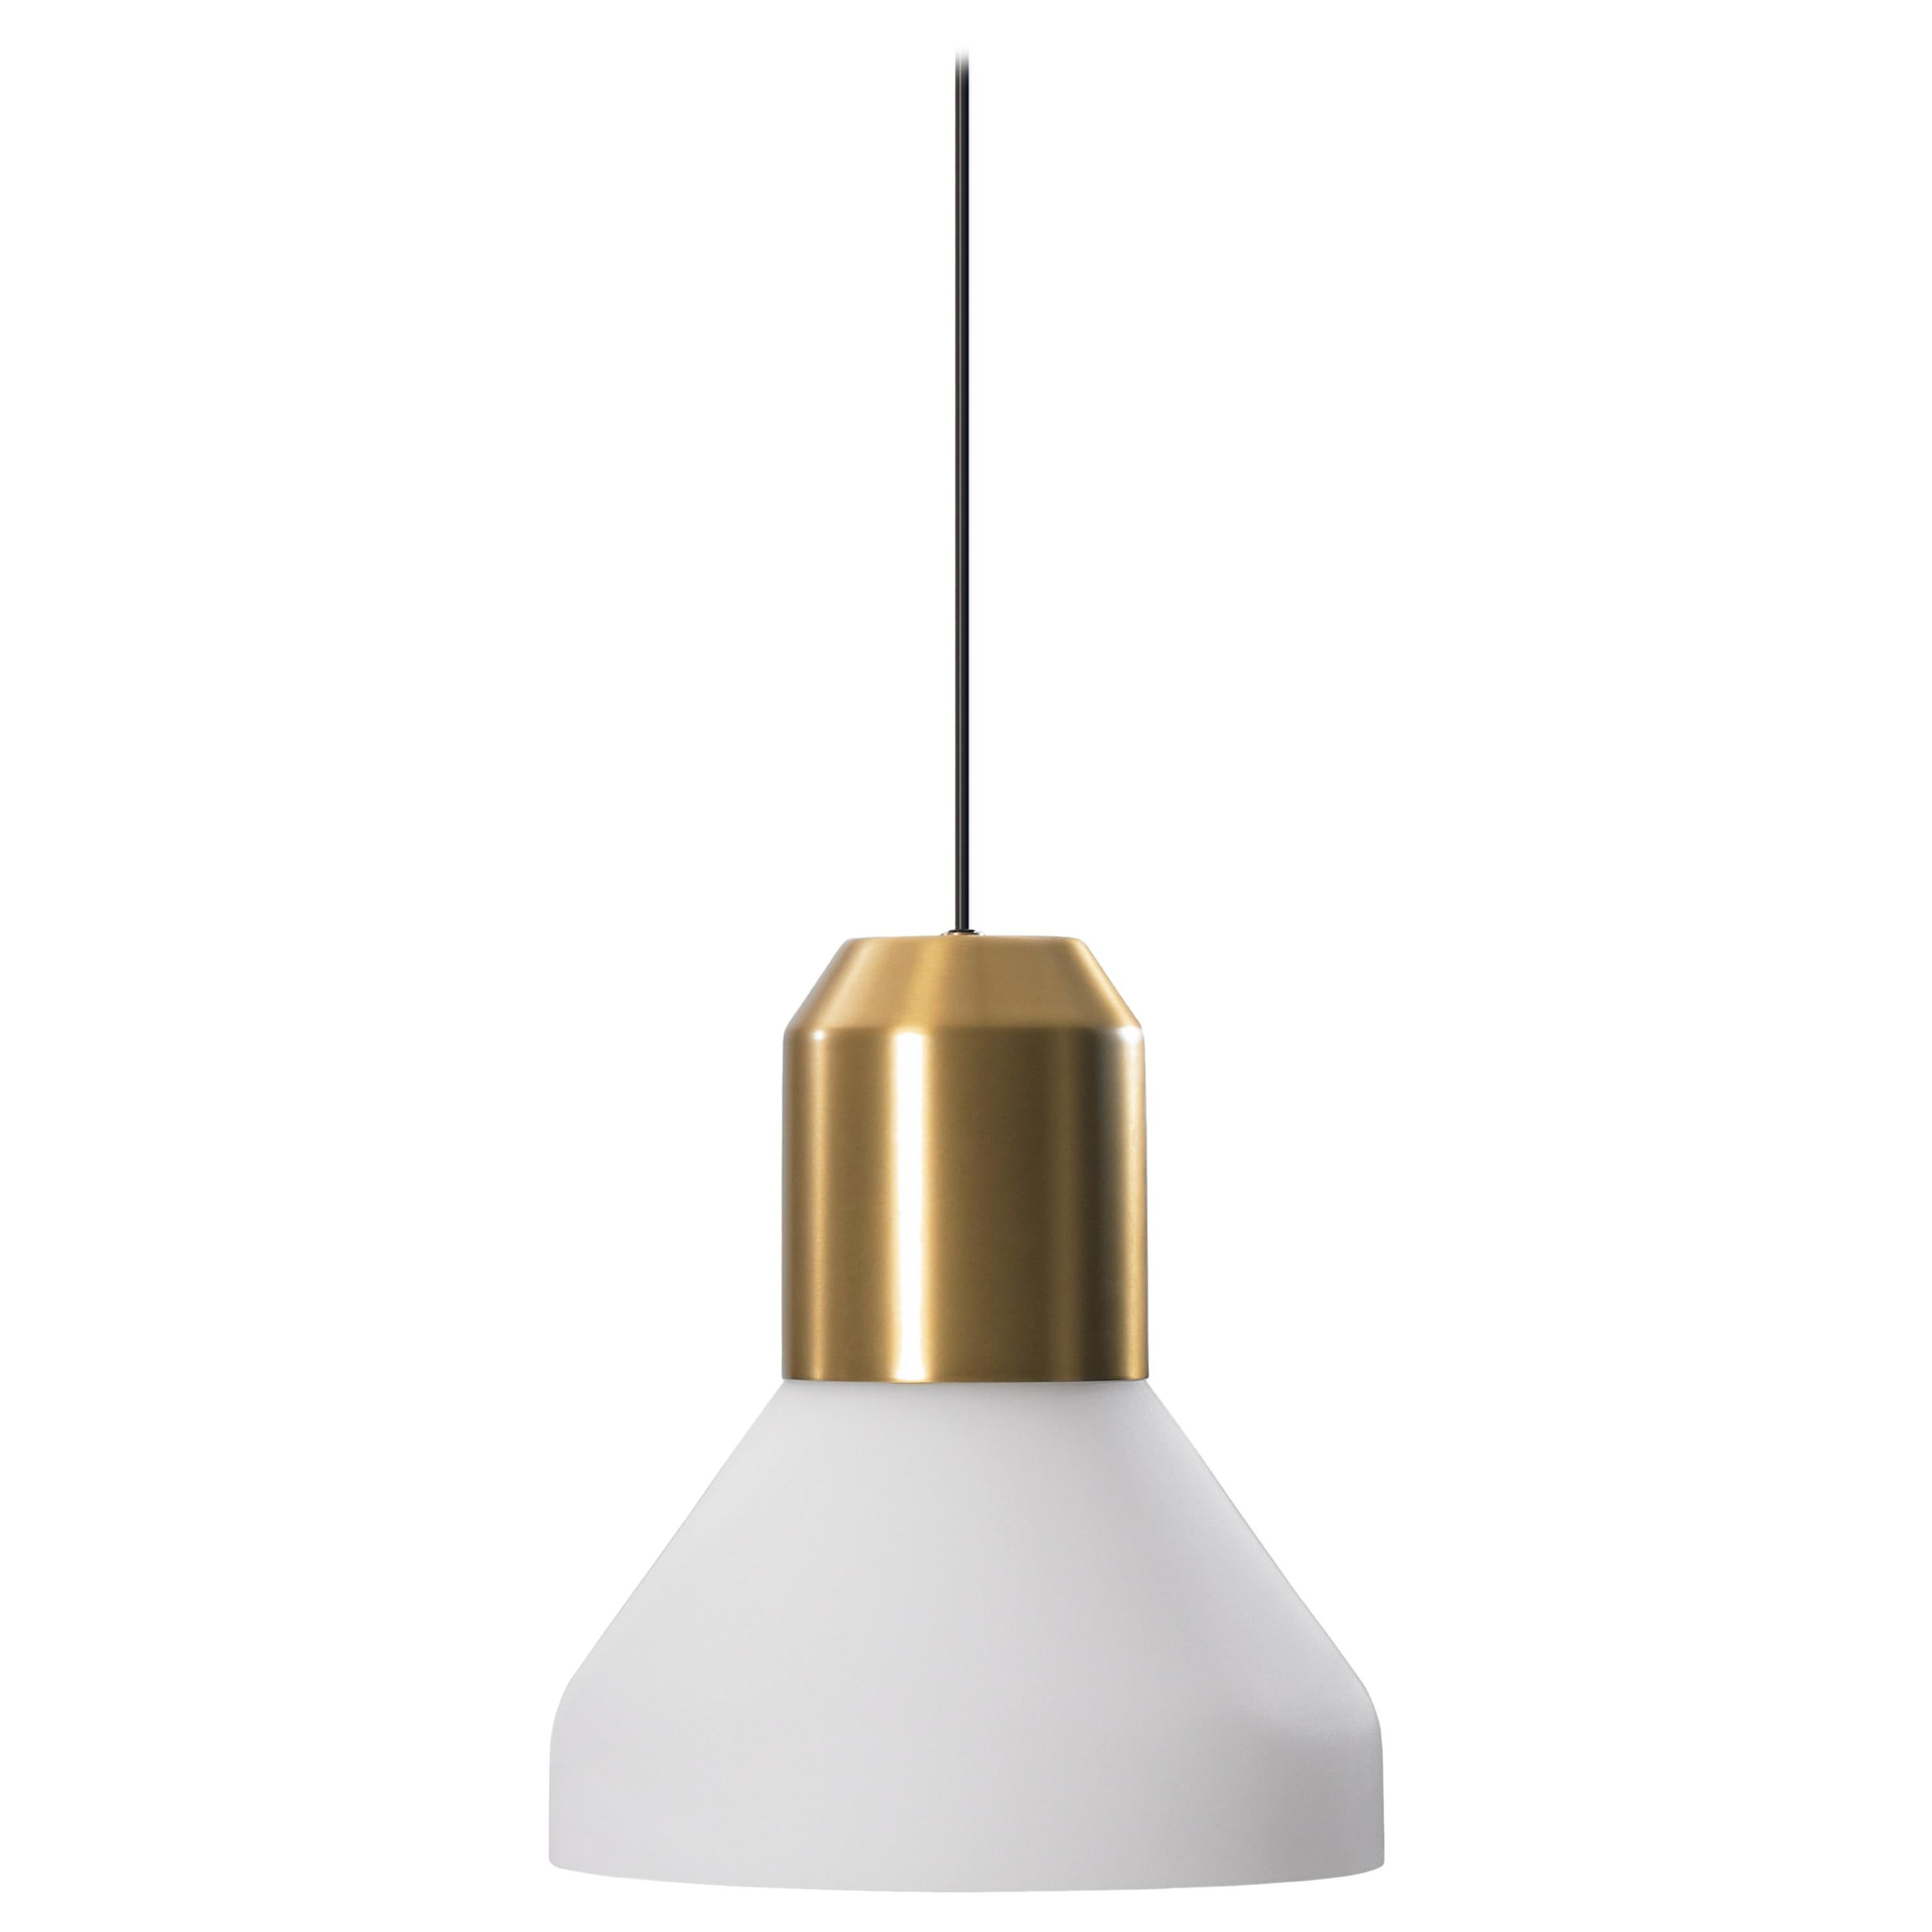 ClassiCon Bell Light Pendant Lamp in Brass with Satin-Finished White Glass For Sale